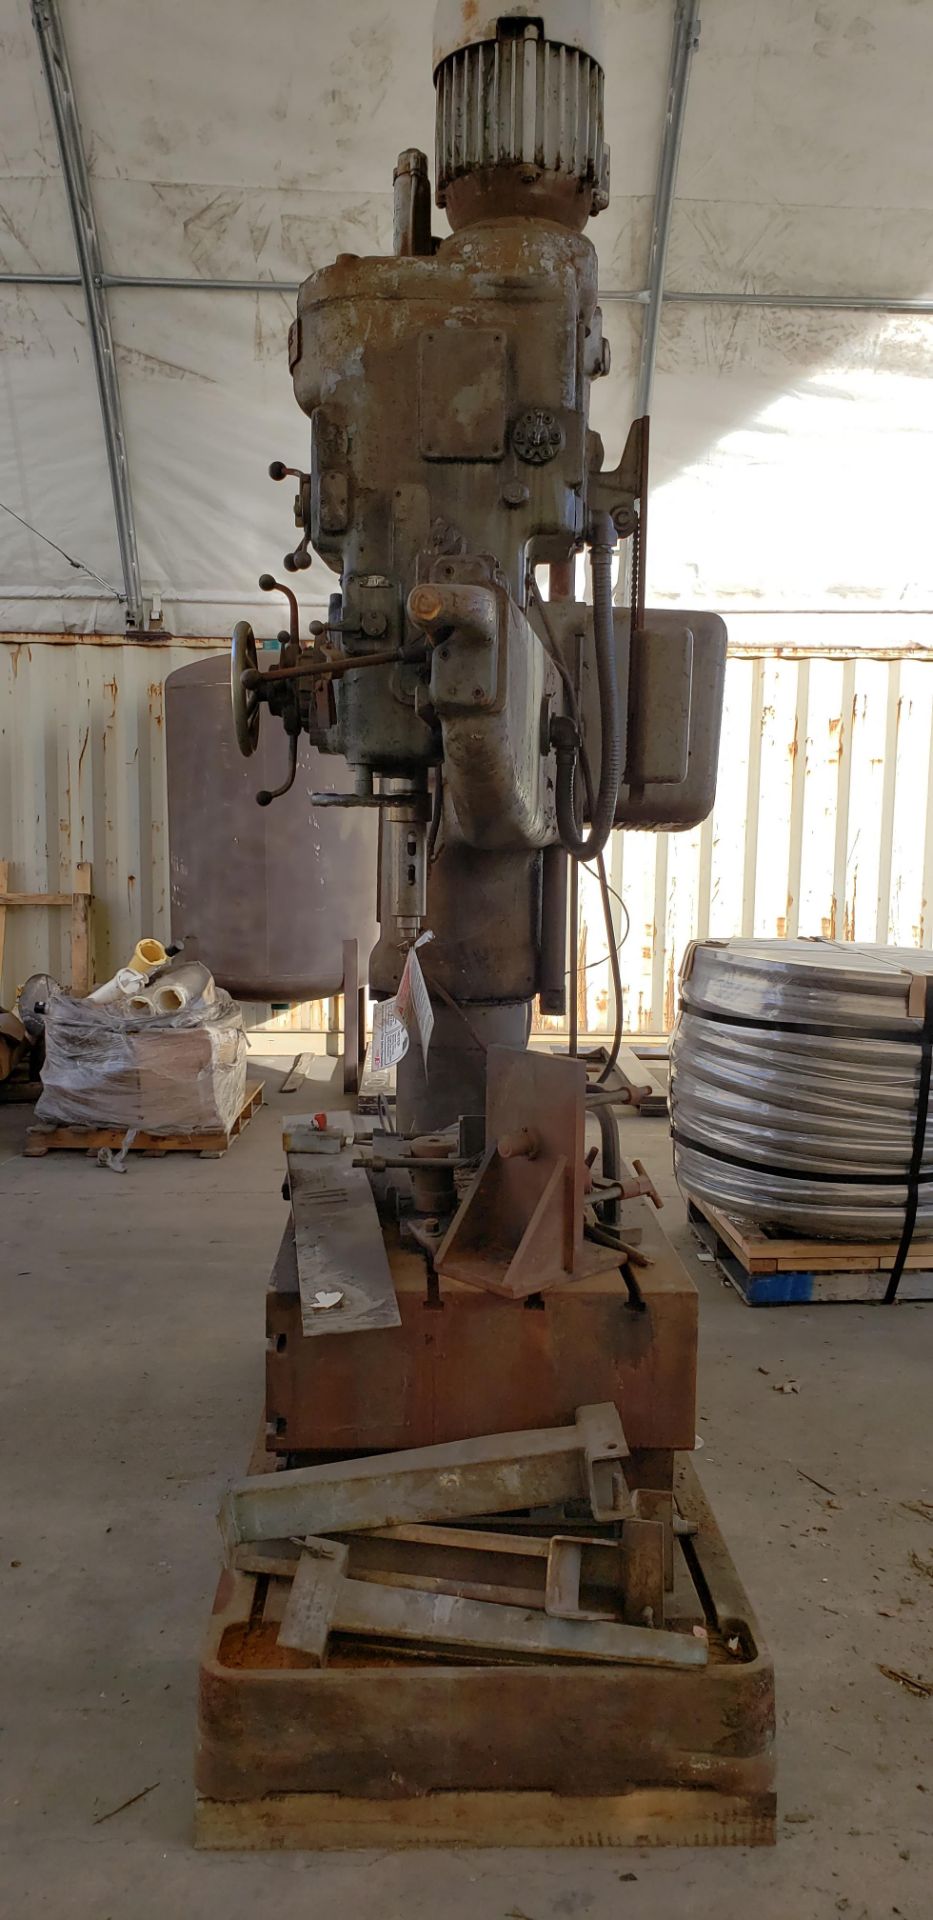 Archdale Heavy Duty Drill Press Foot Print 10' x 4' x 8', Located In: Riverside - Image 6 of 8